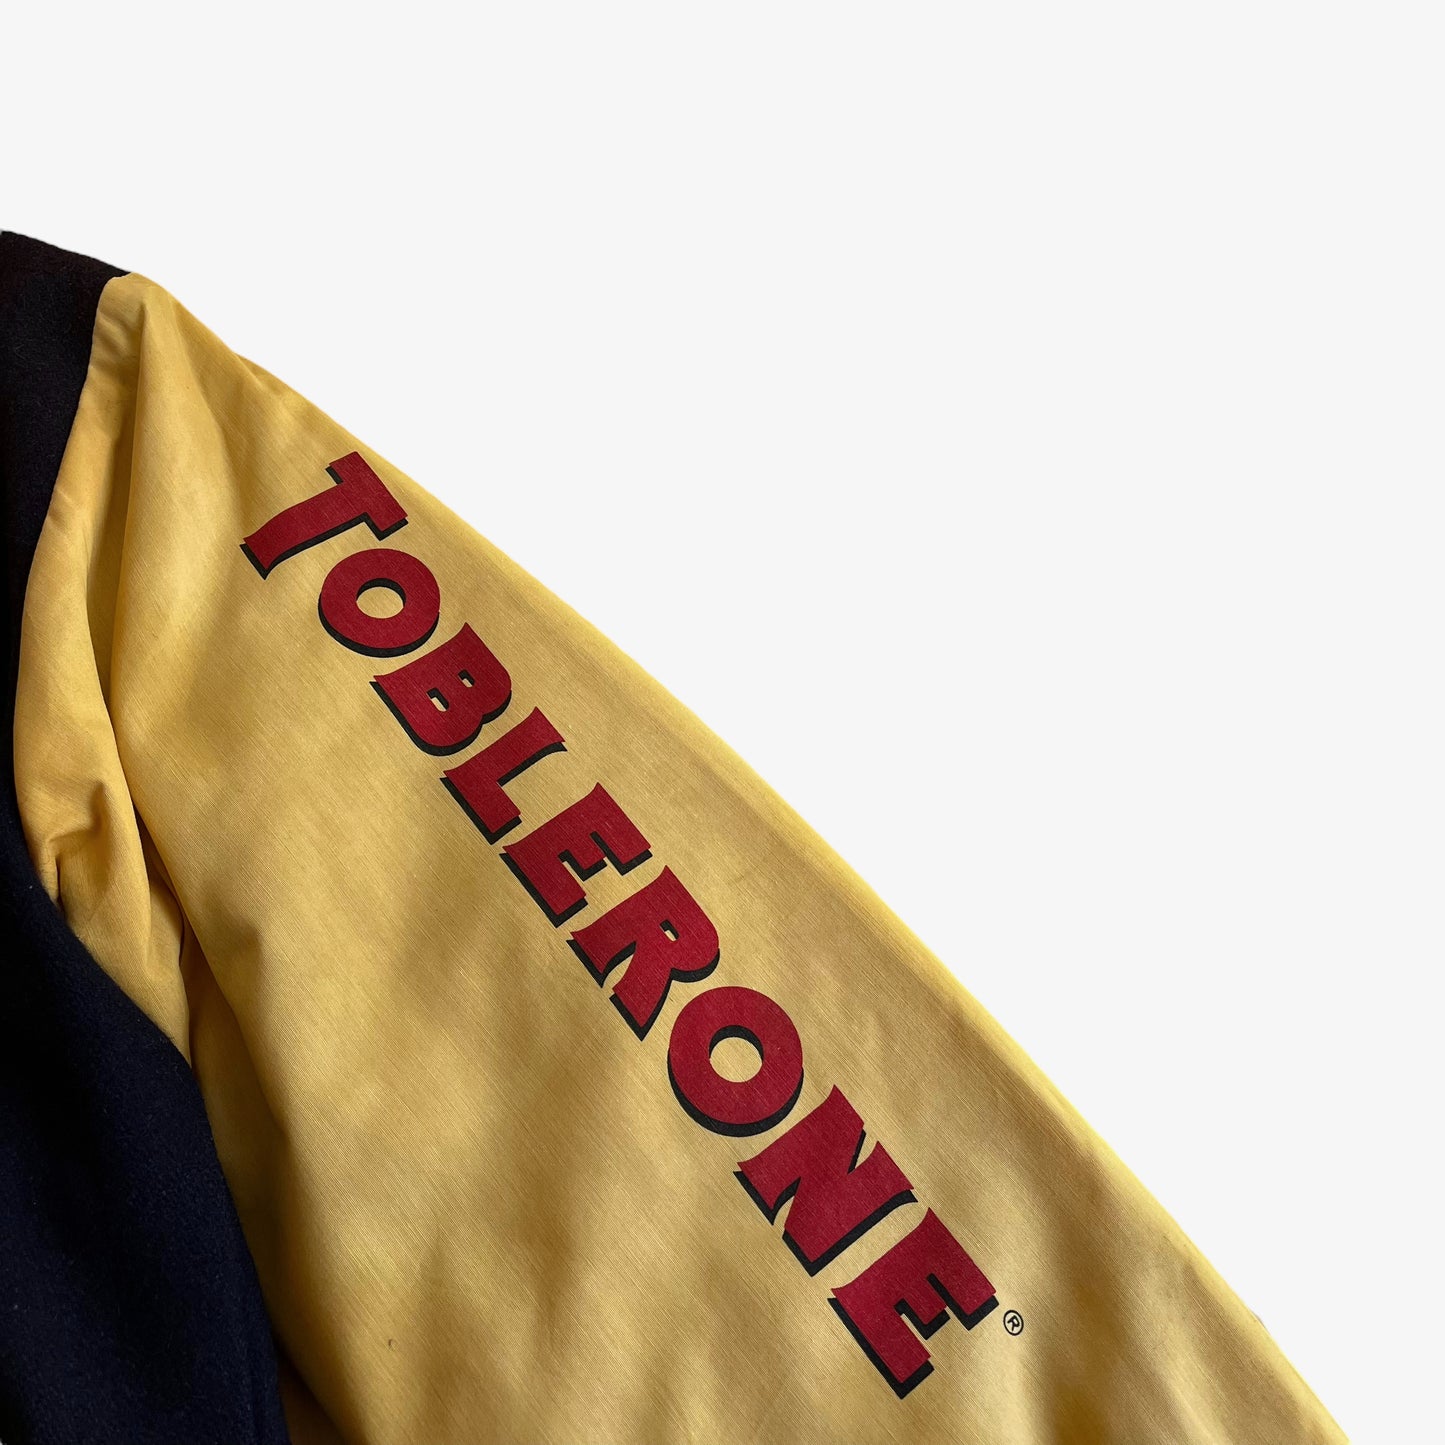 Vintage 90s Toblerone Varsity Jacket With Sleeve Spell Out Arm - Casspios Dream